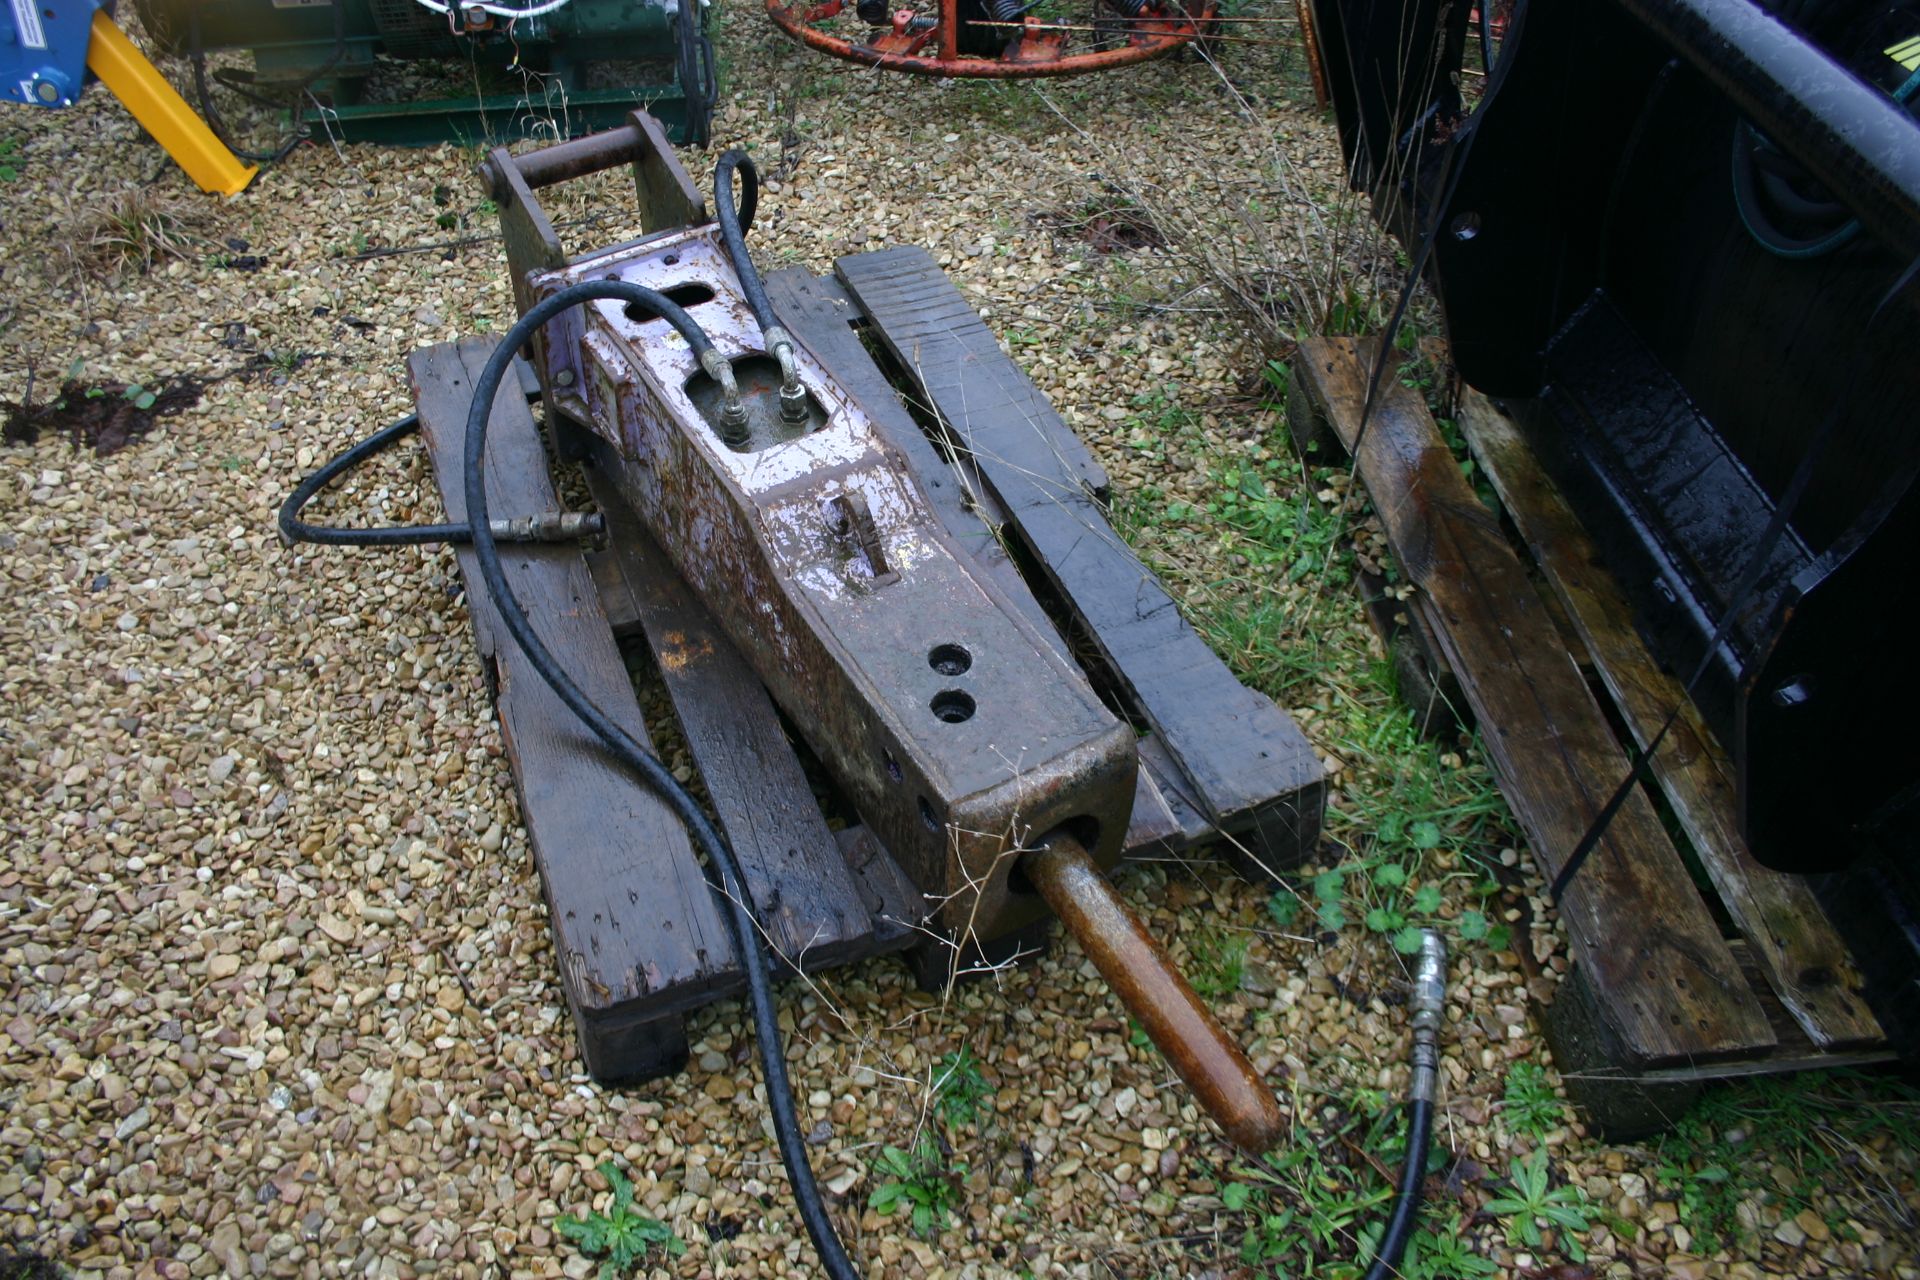 PRO DEM HYDRAULIC BREAKER ATTACHMENT, BELIEVED TO BE 2005 & CAME OFF 5 TON MACHINE *PLUS VAT* - Image 2 of 3